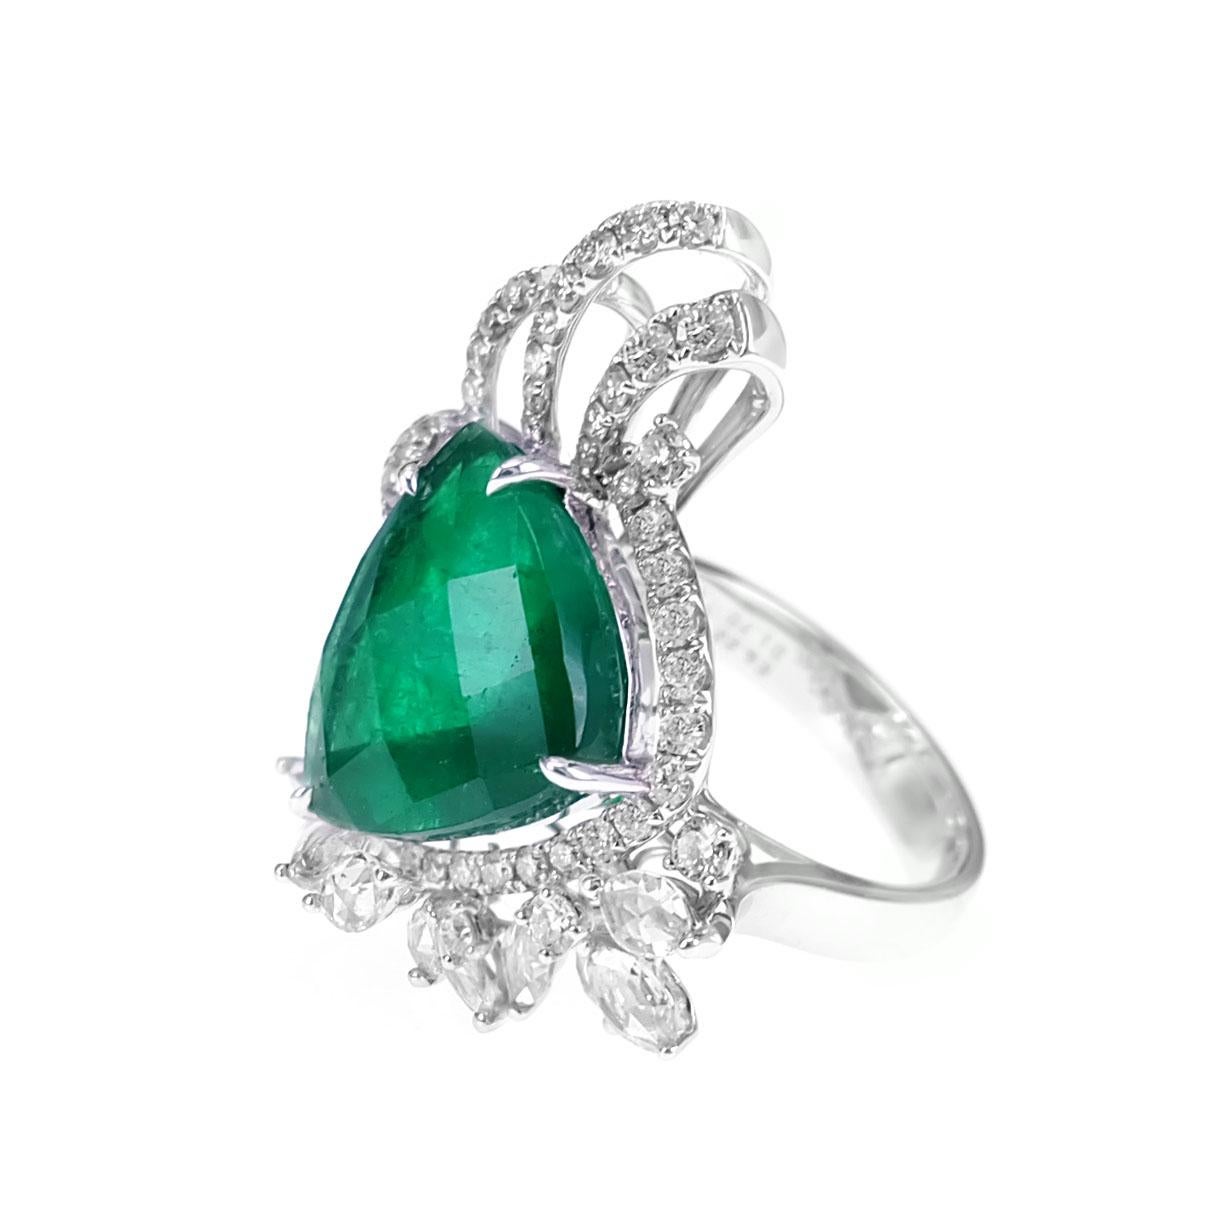 This designer ring has 6.22 carats of Colombian Emerald and 1.70 carats of white round brilliant diamond. This emerald has a unique cut and pattern which enhances the brilliance of the stone. The details of the diamond are mentioned below:
Color: